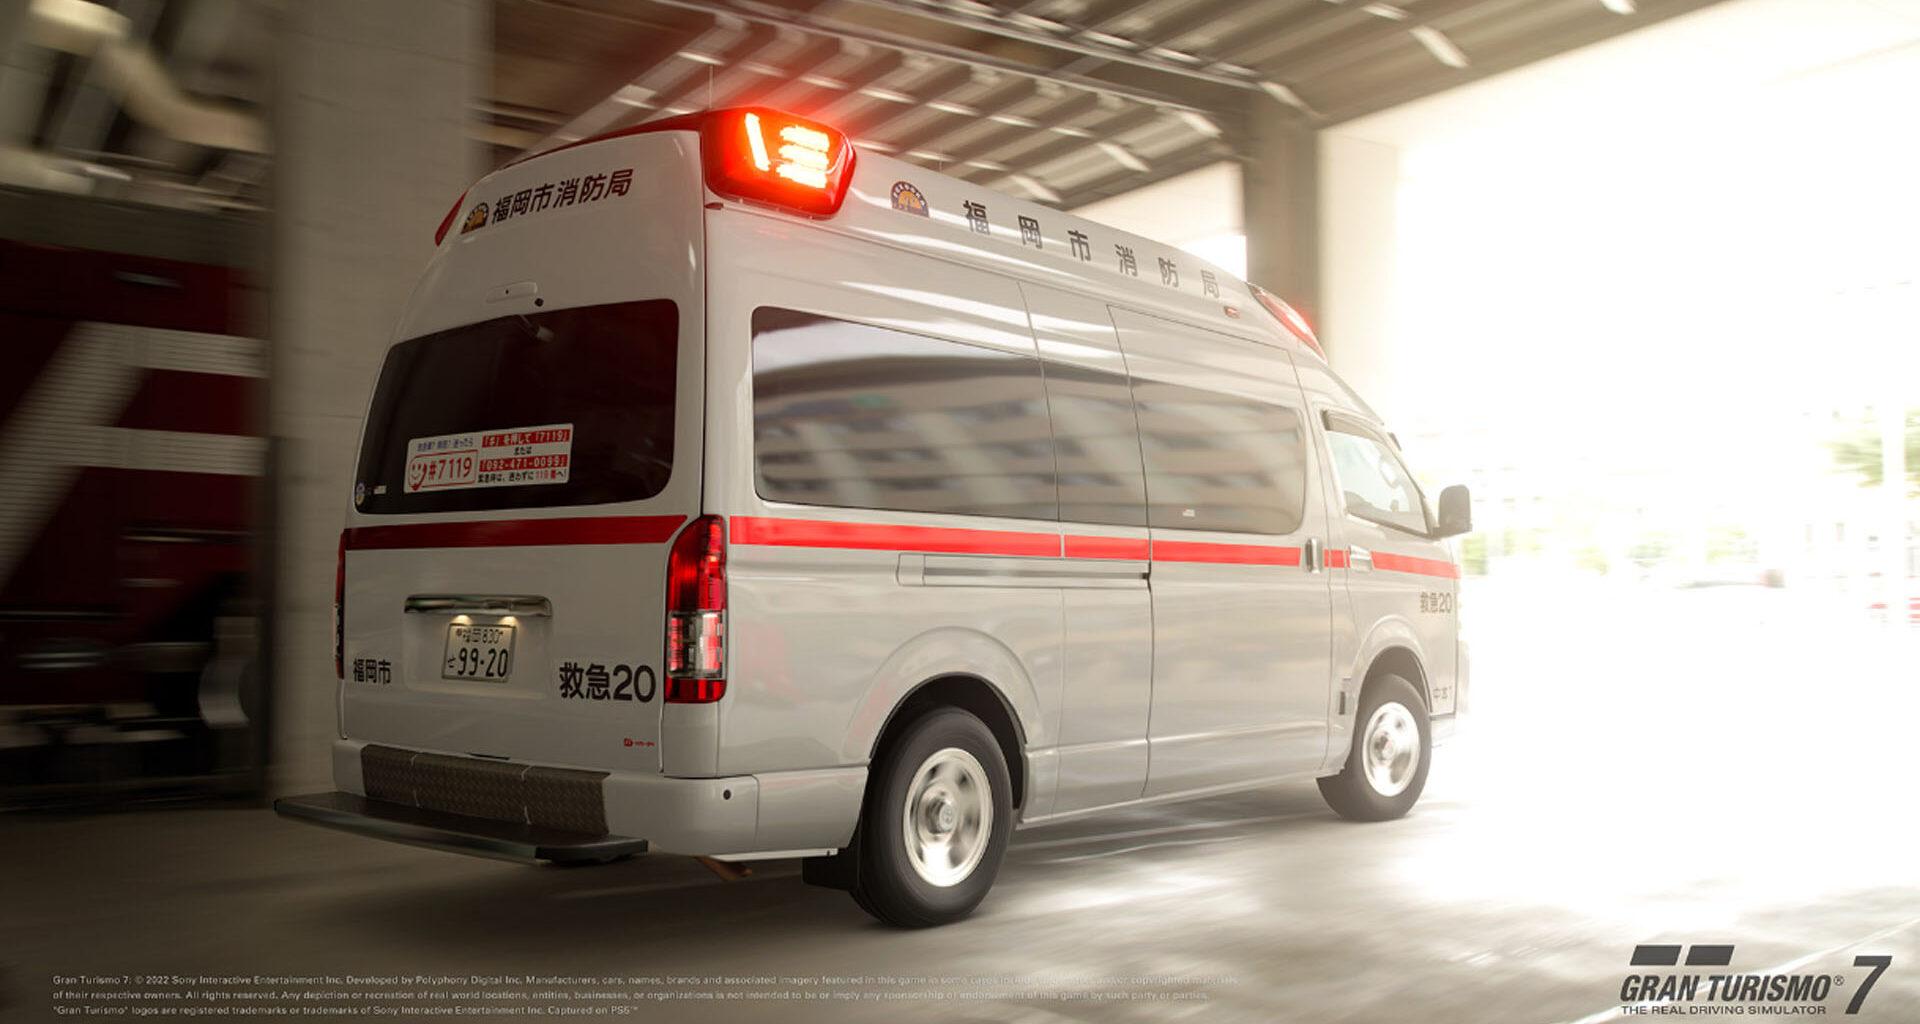 Gran Turismo 7 prizes up for grabs, Toyota Ambulance confirmed